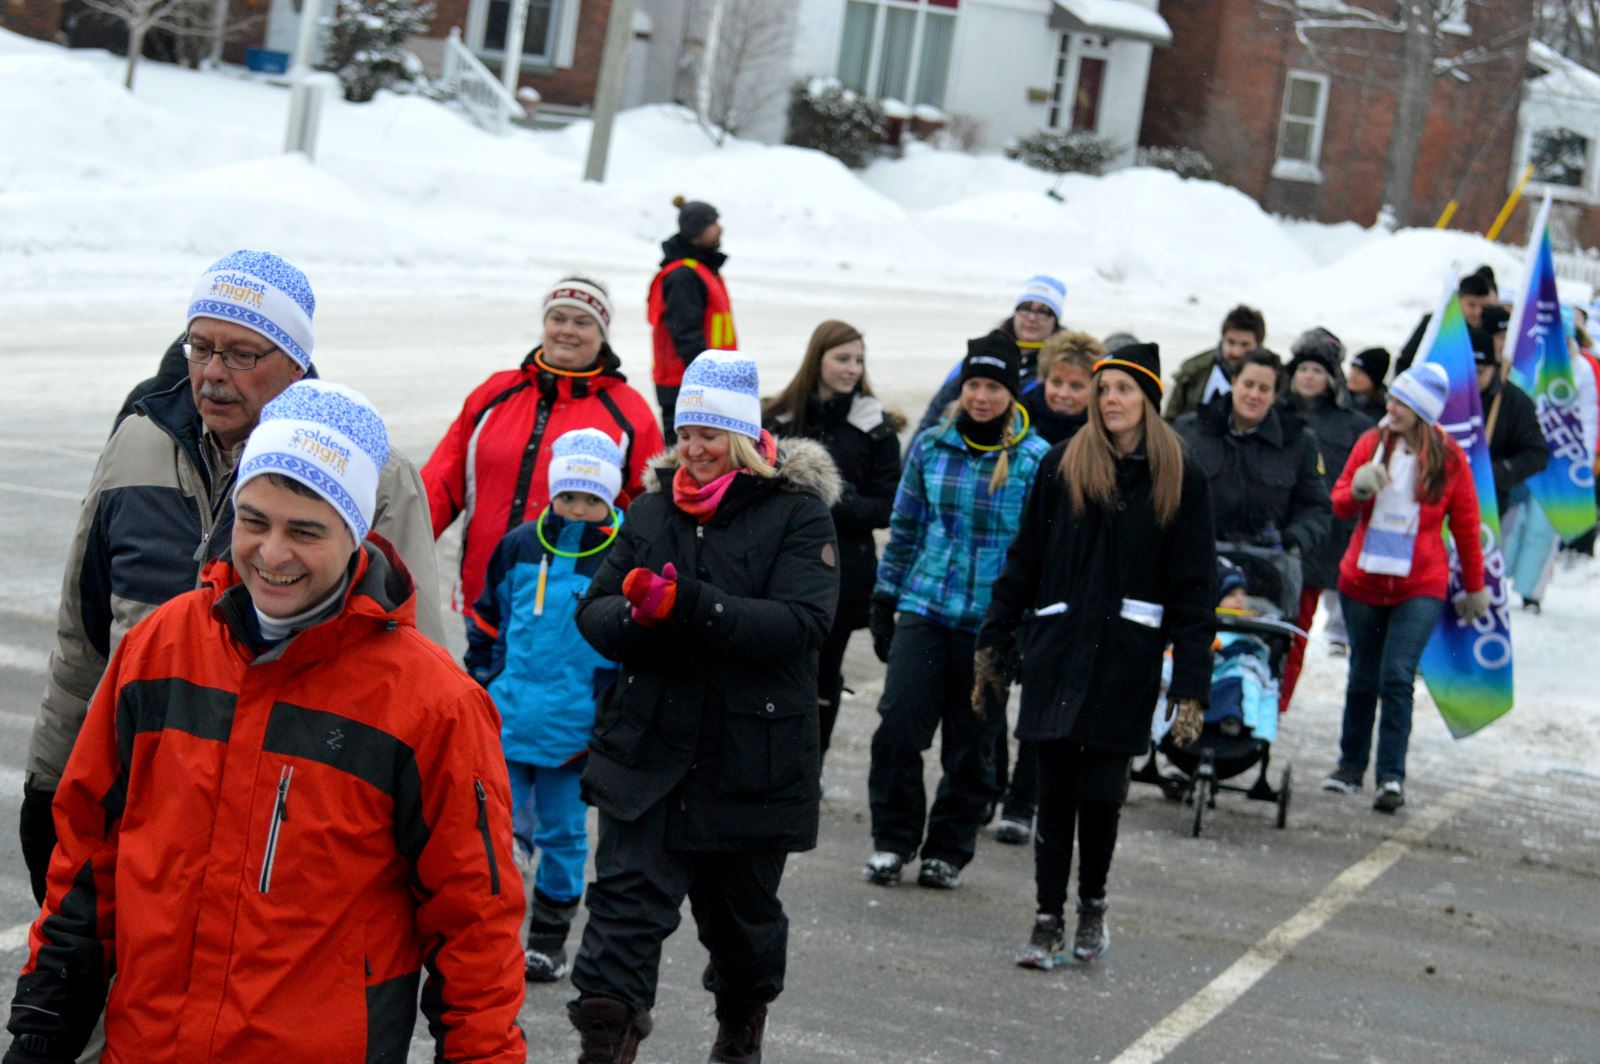 Community shines on Coldest Night of the Year - North Bay News